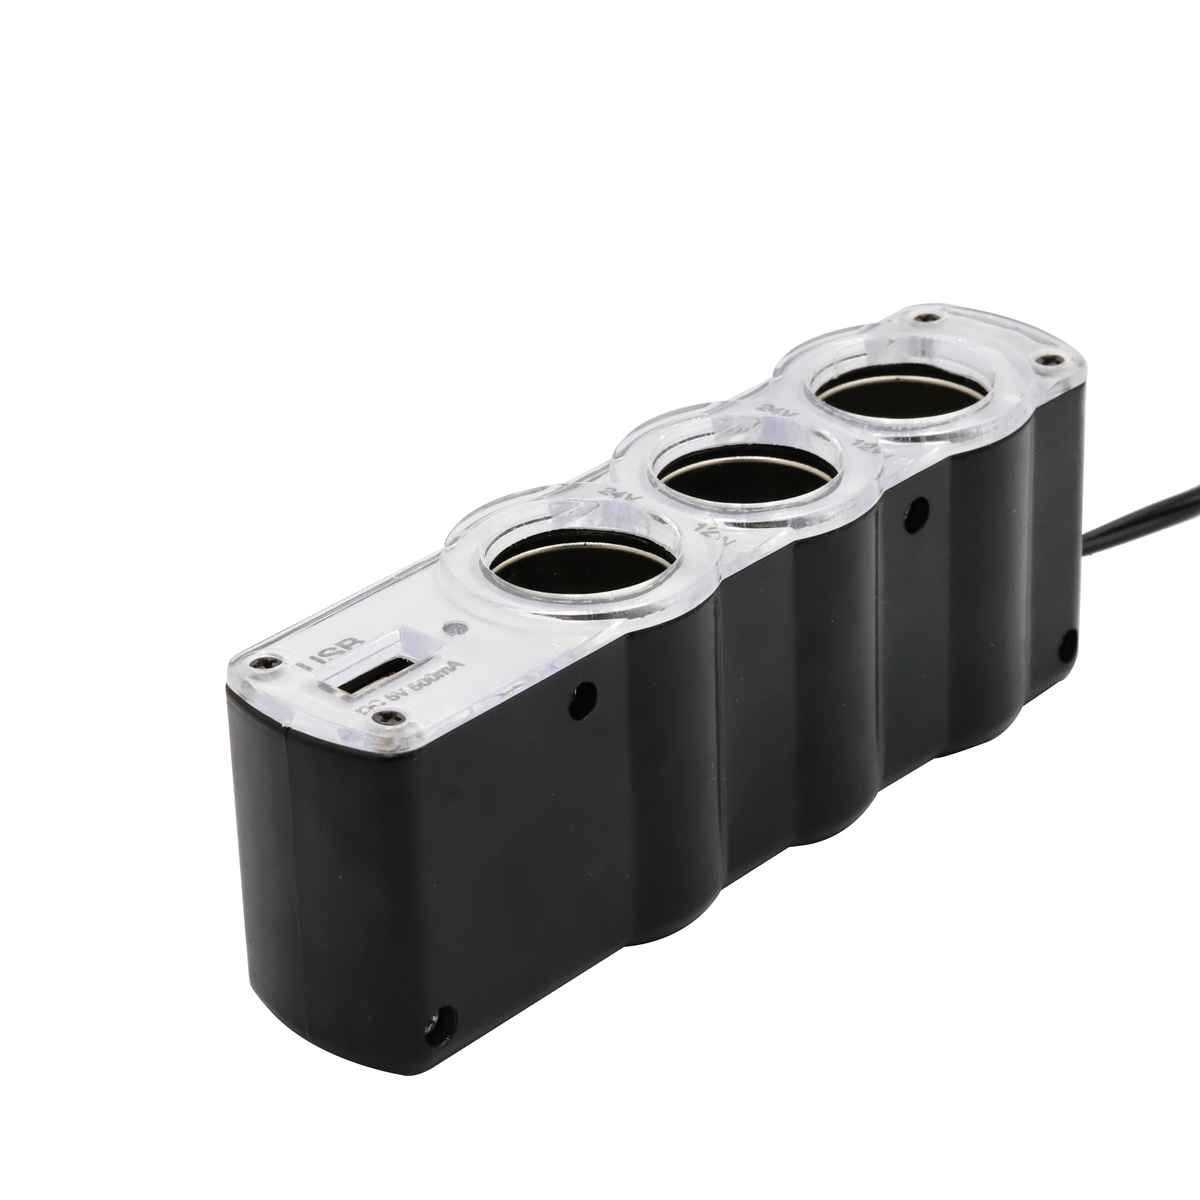 4. LM-CR-SH03 Triple Socket Charger Bulk Purchase and Corporate purchase from China Union Power -Description-